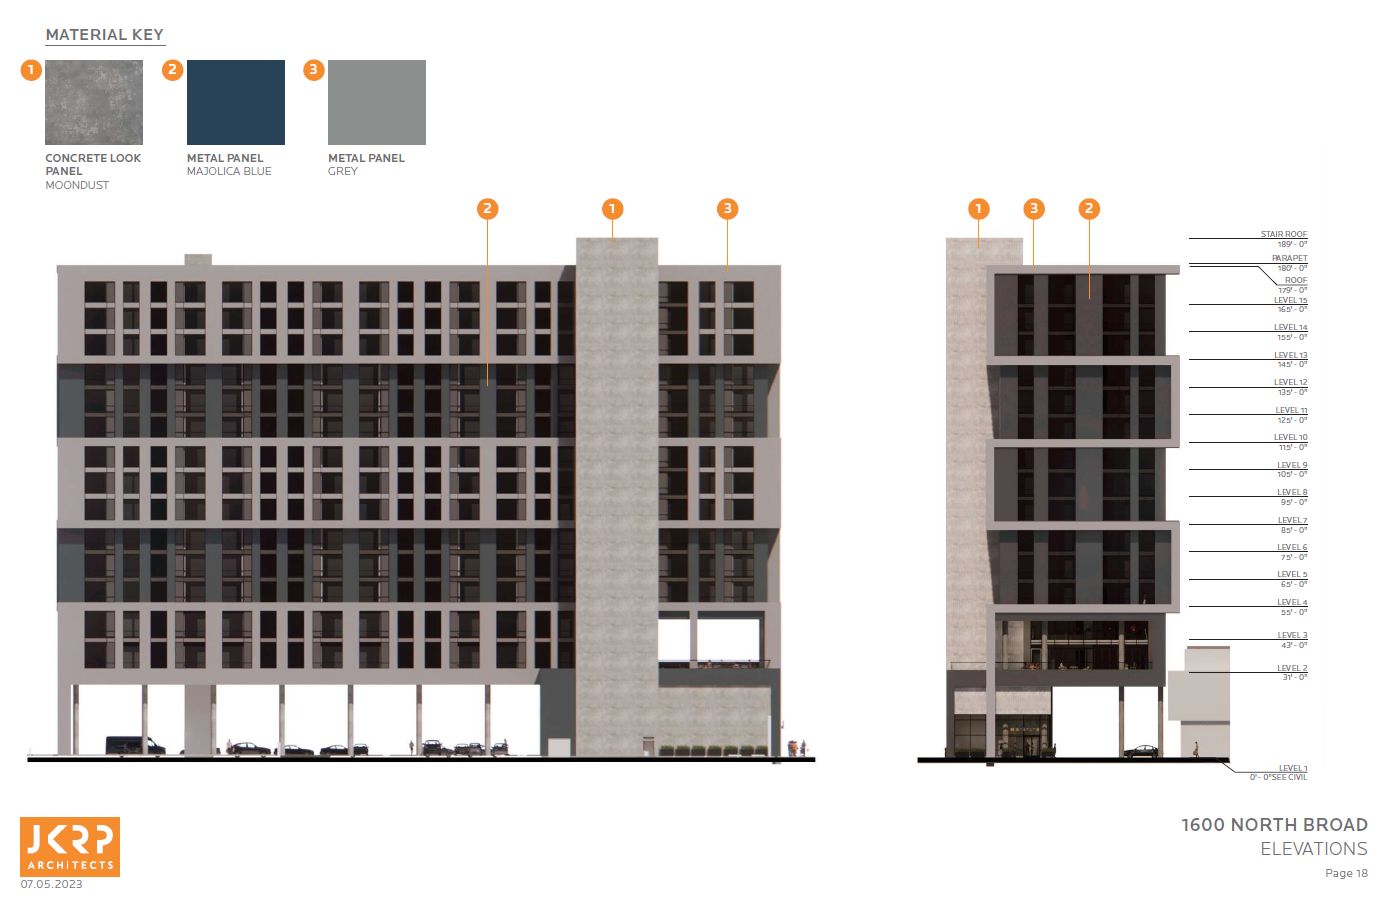 1600 North Broad Street (1406 Cecil B. Moore Avenue). Building elevations. Credit: JKRP Architects via the Civic Design Review